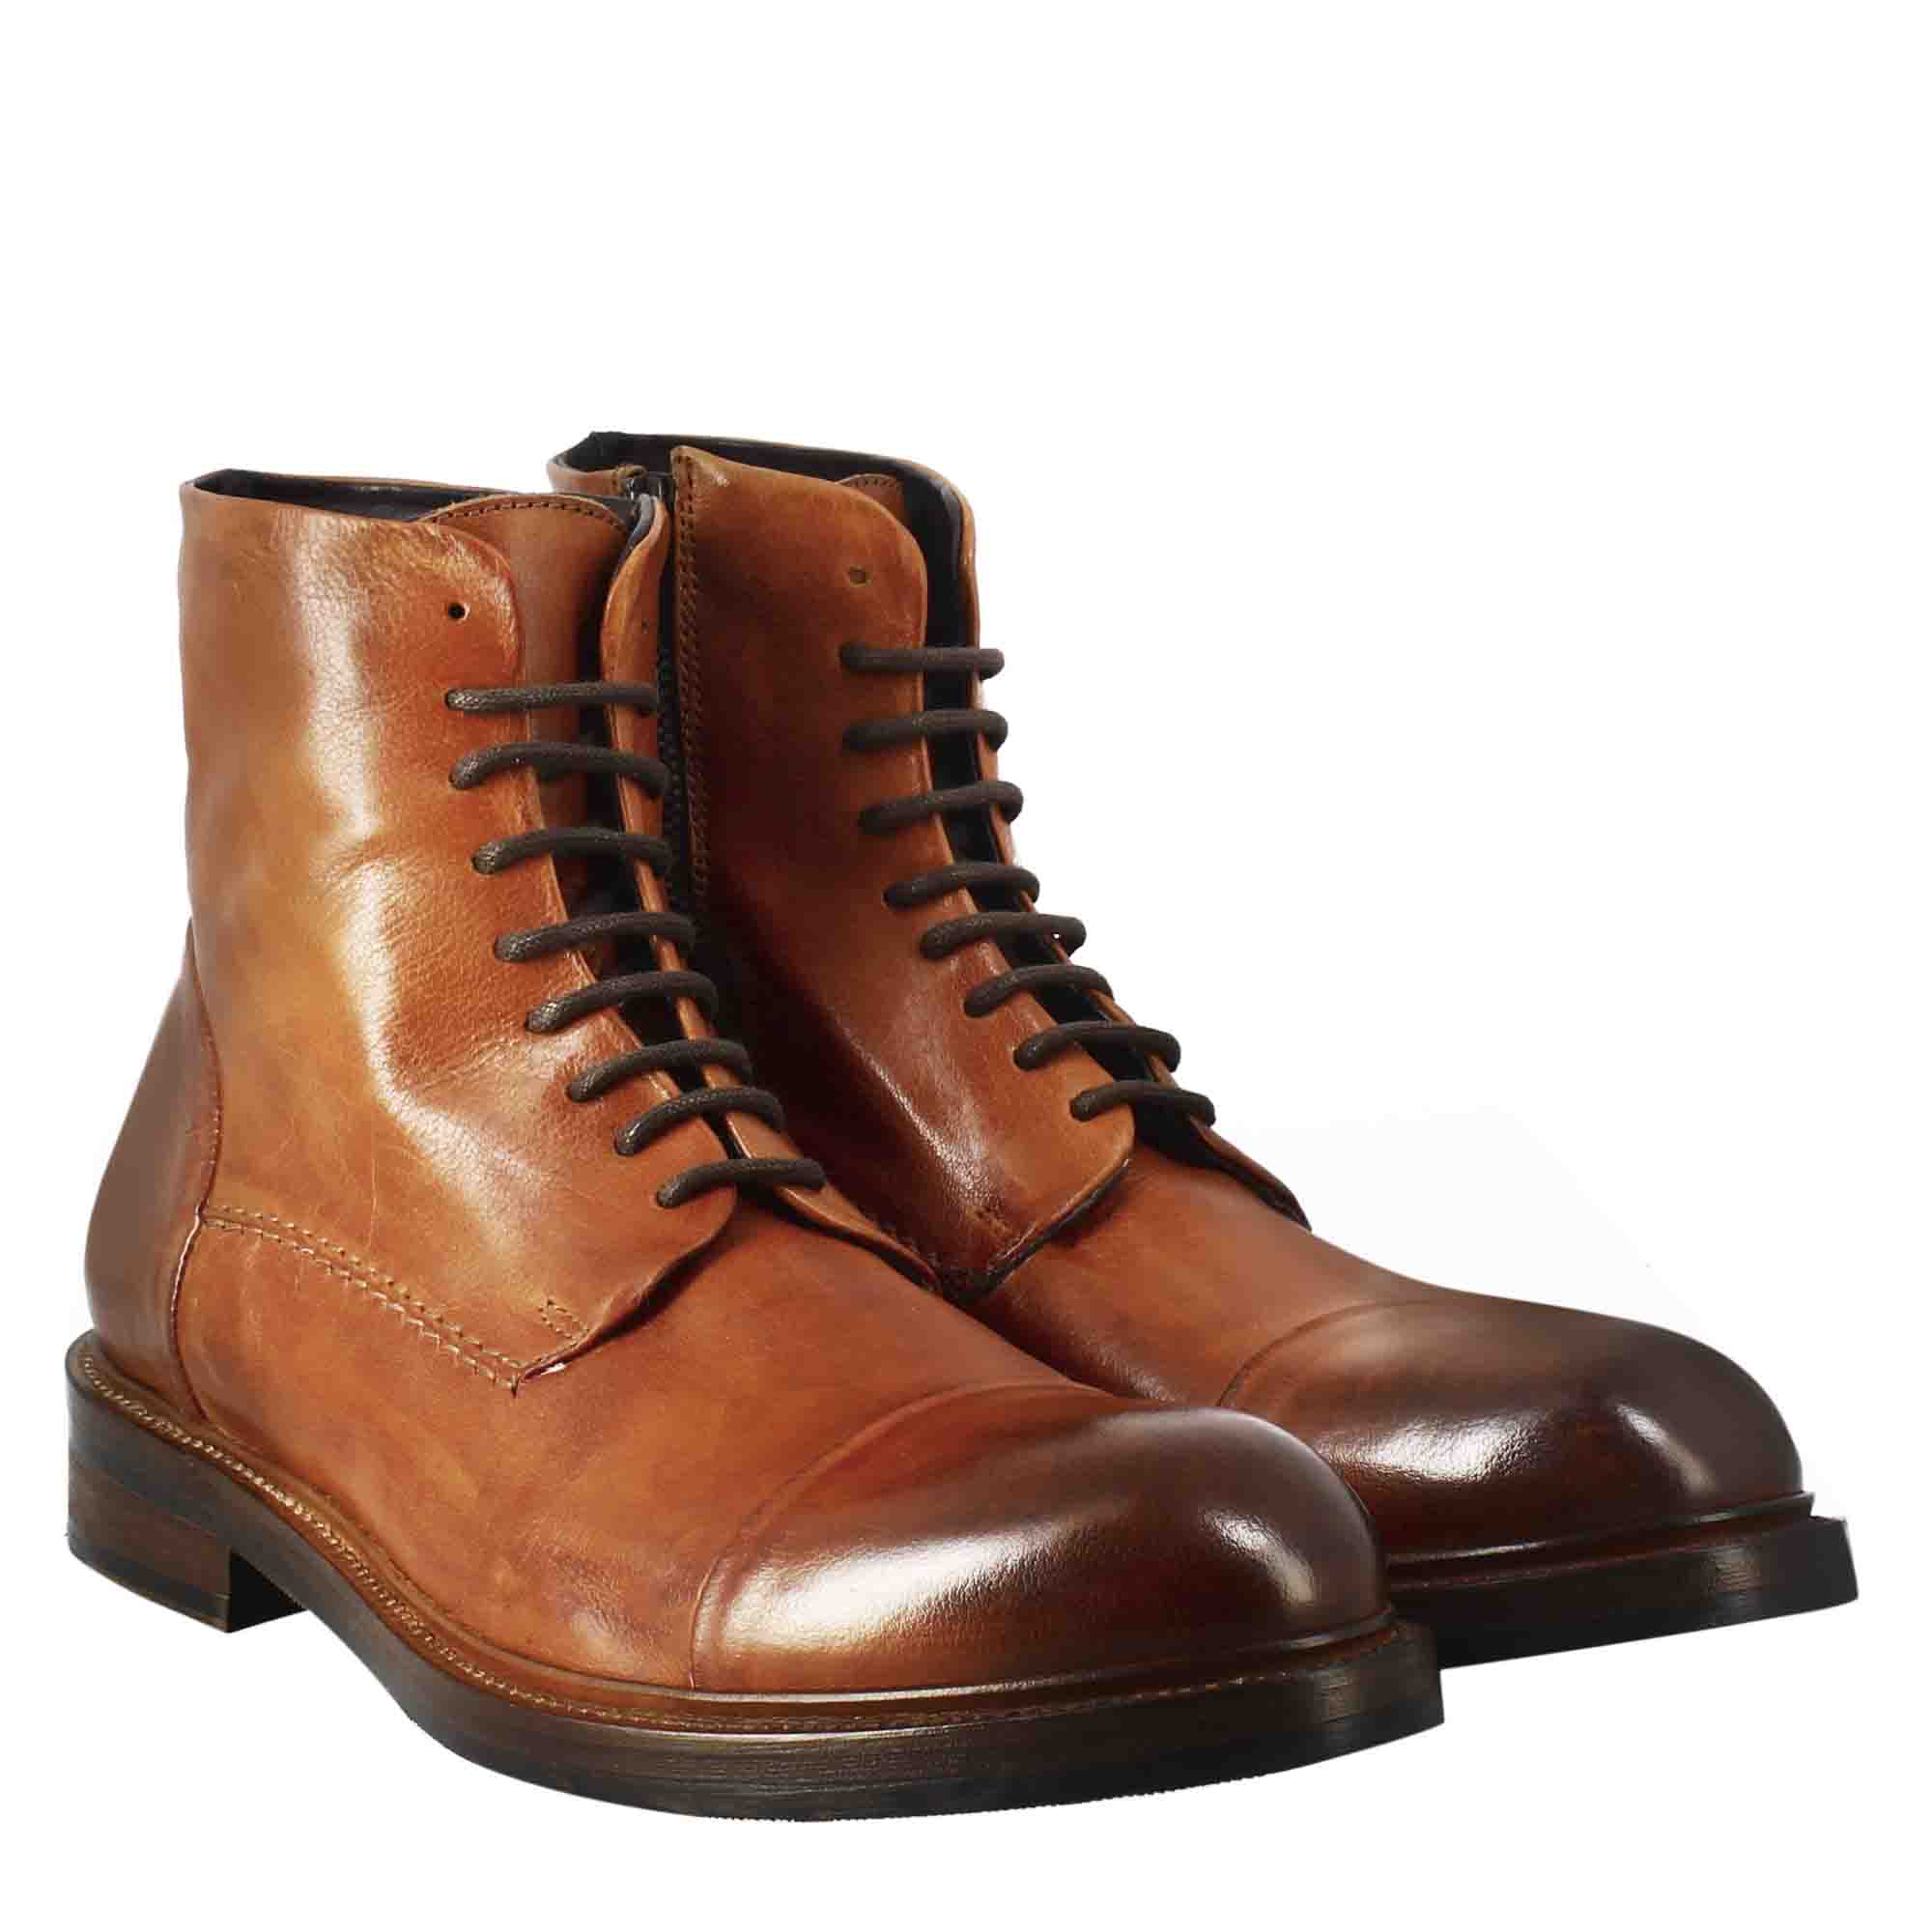 Tan Washed Leather Amphibian Boots